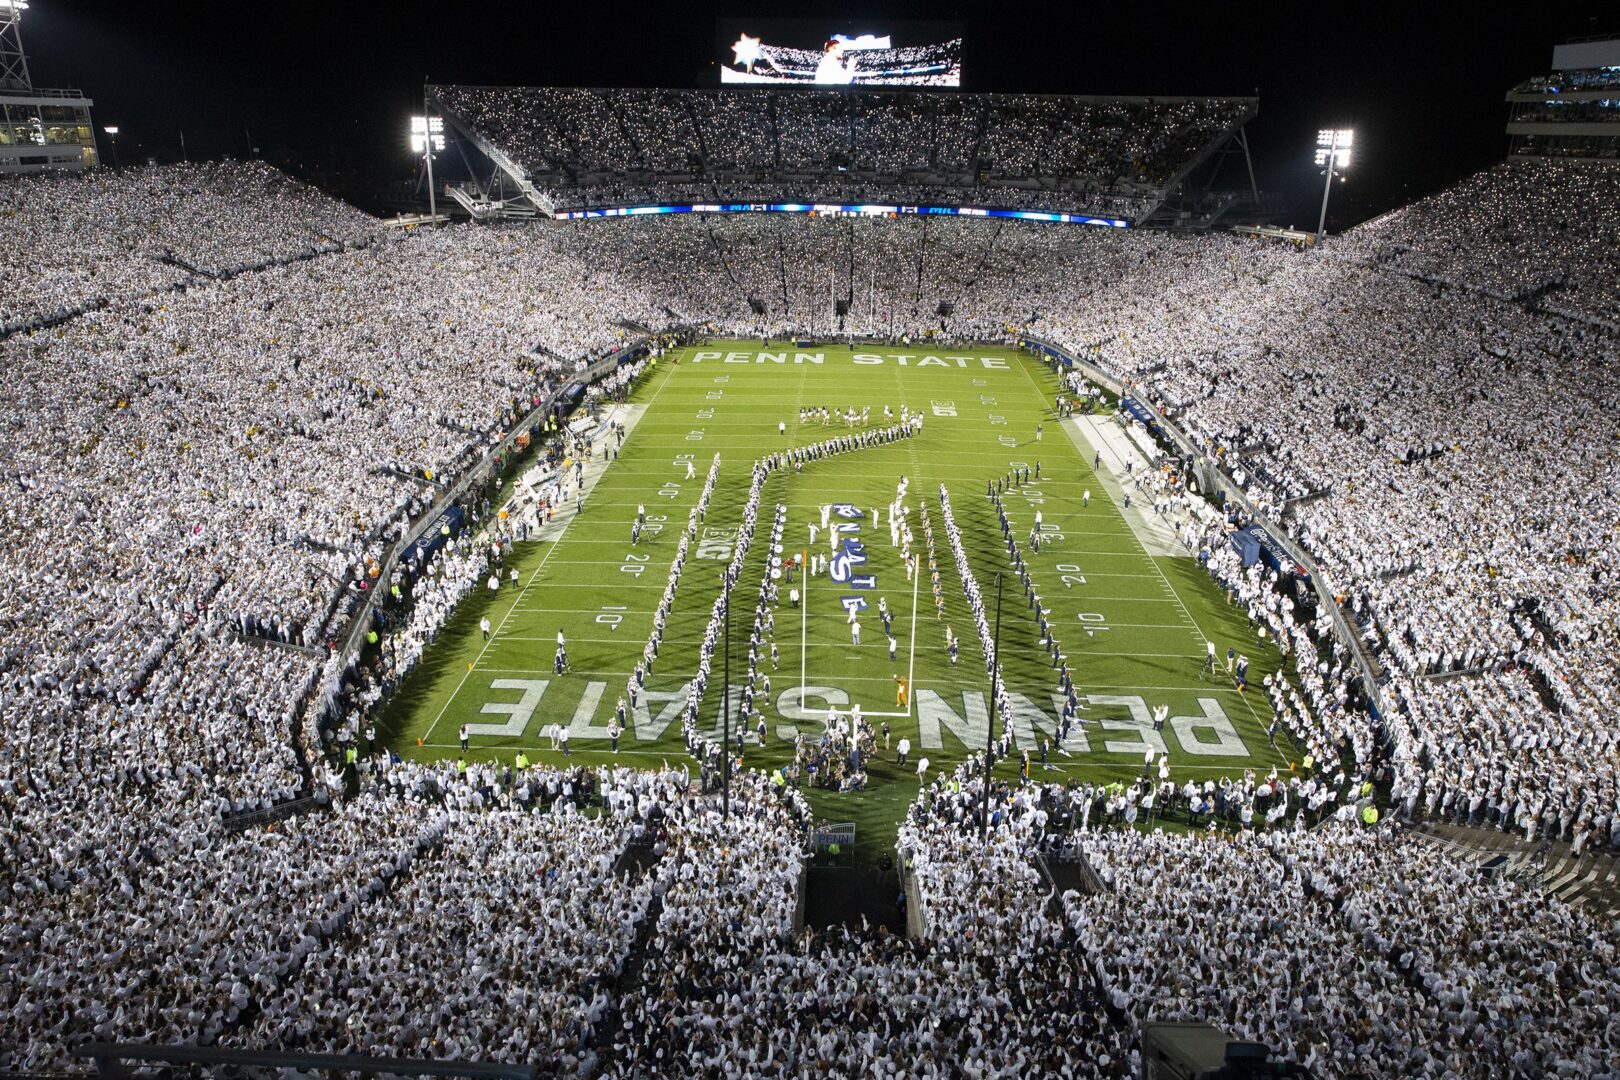 Penn State, like many universities, does not disclose the financial values of its students’ NIL contracts.